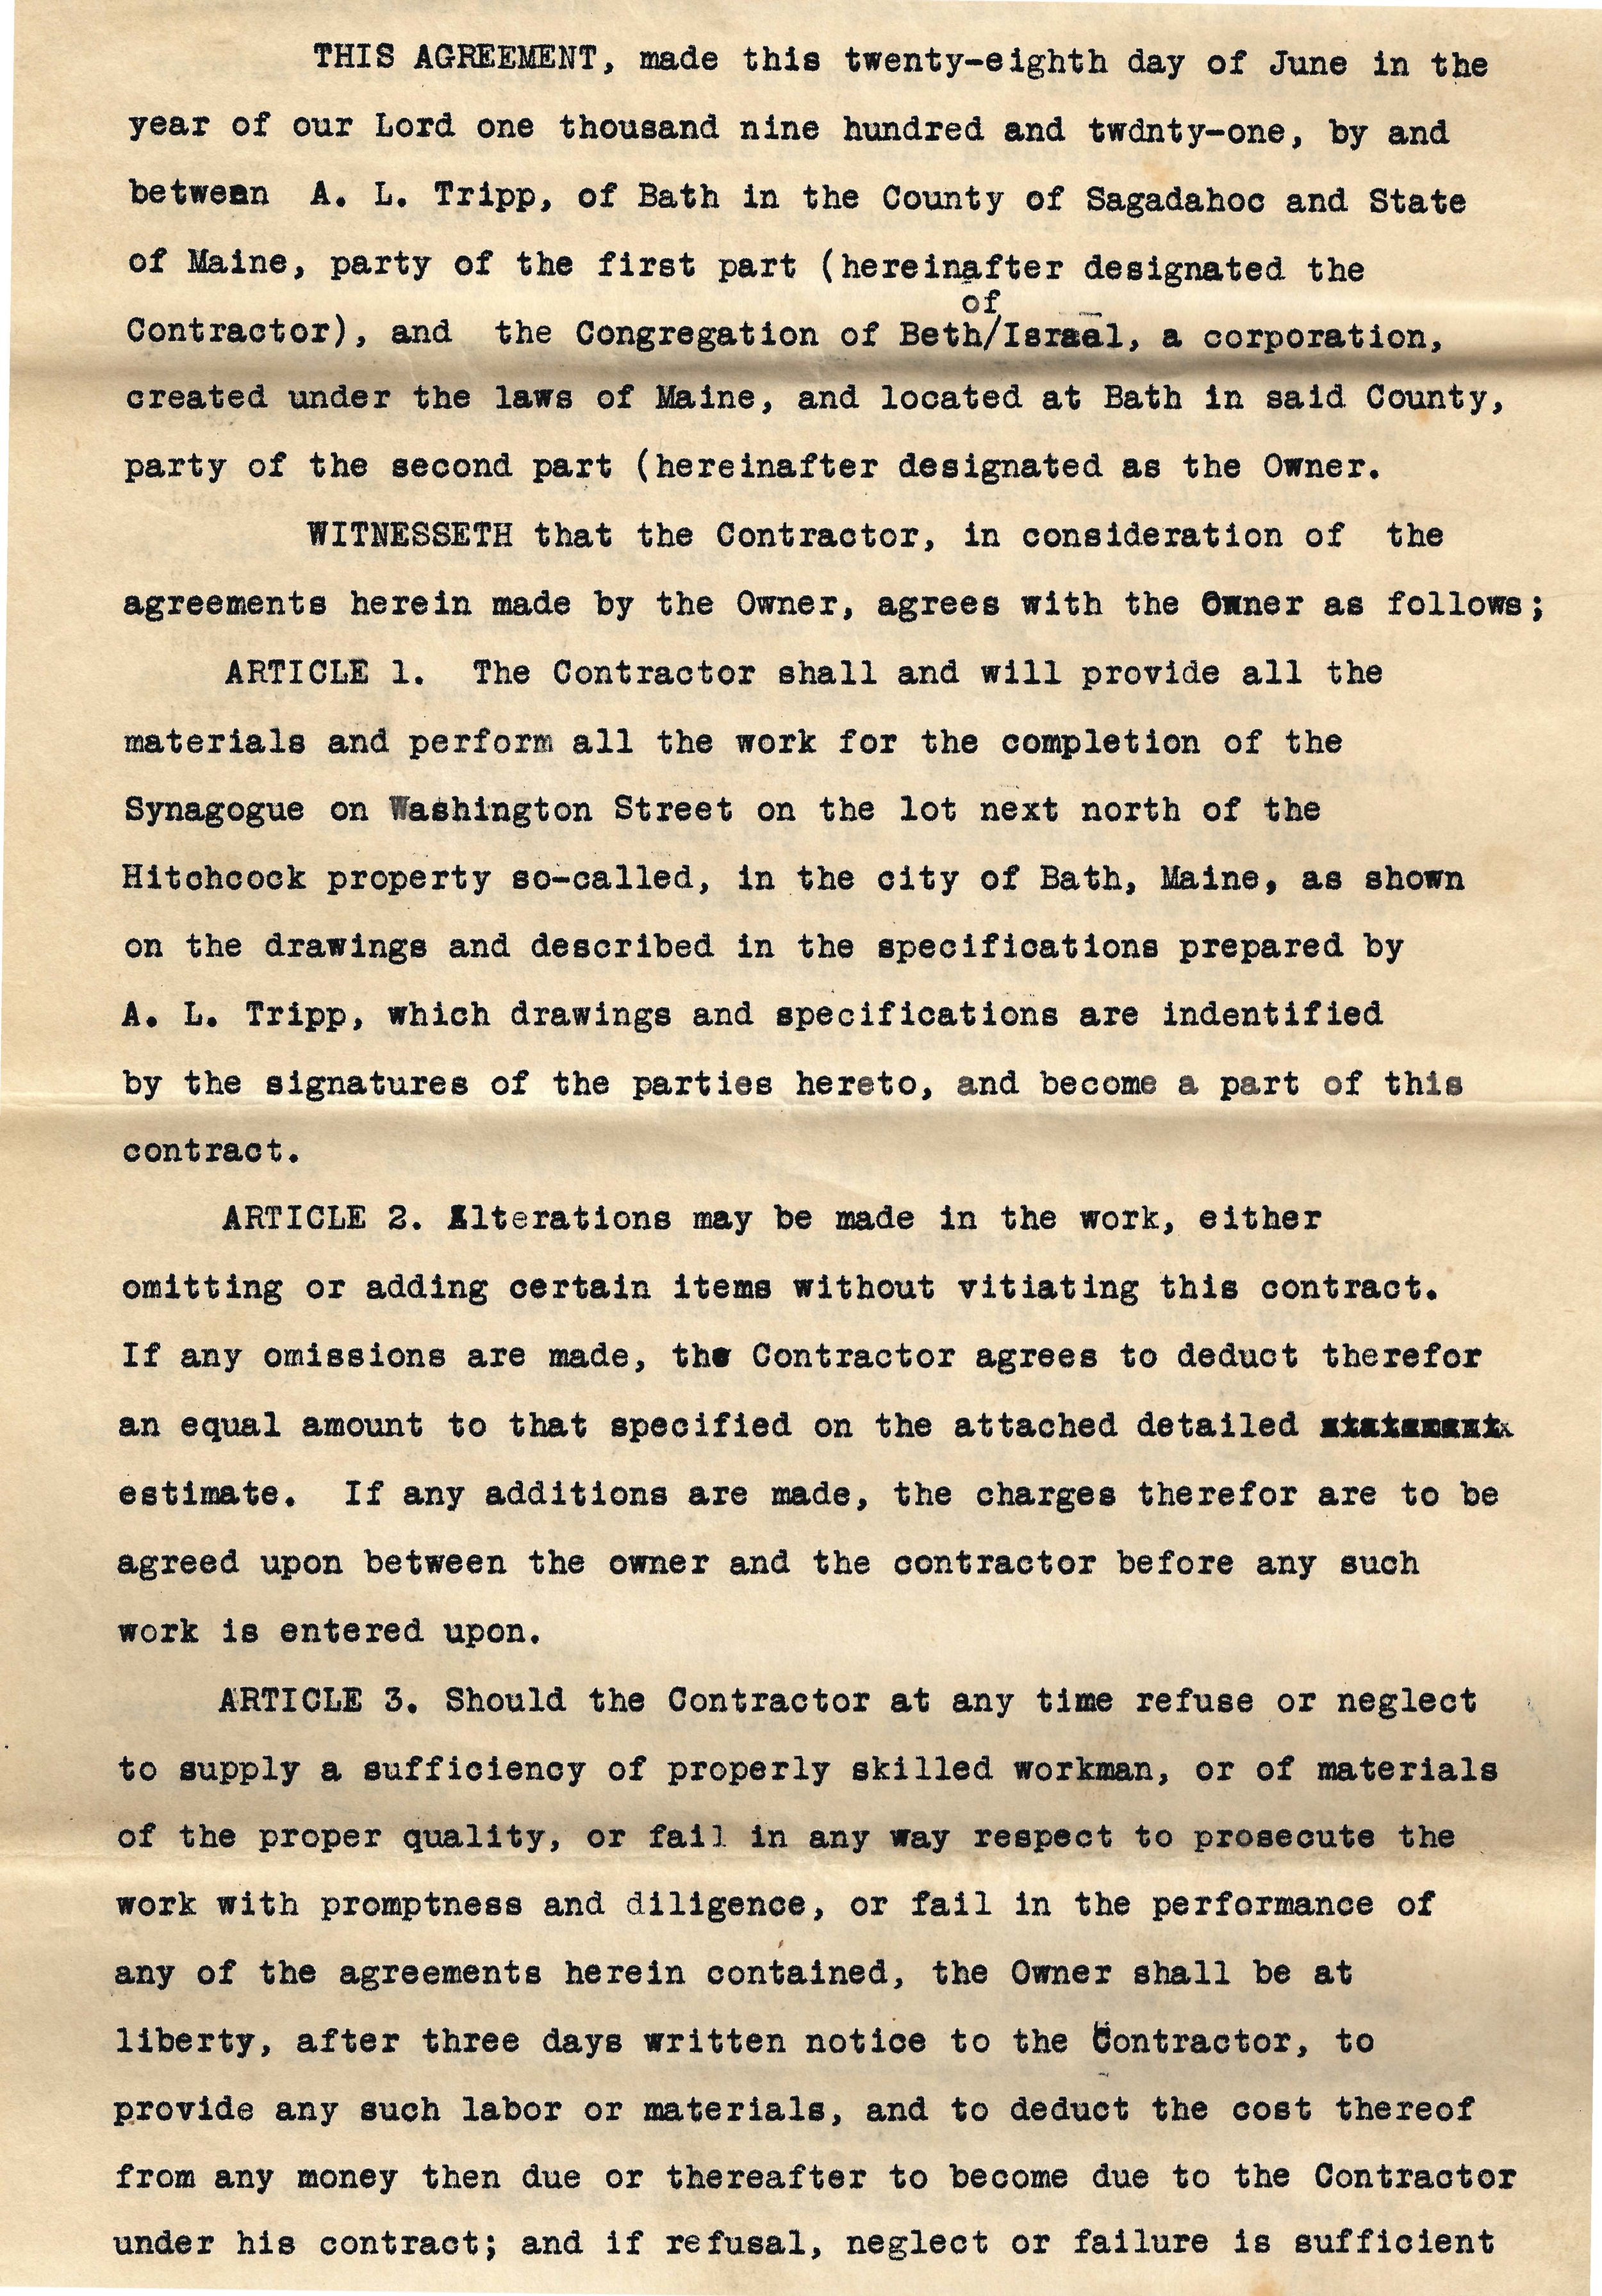 Contractor Agreement (1921)_Page_02.jpg